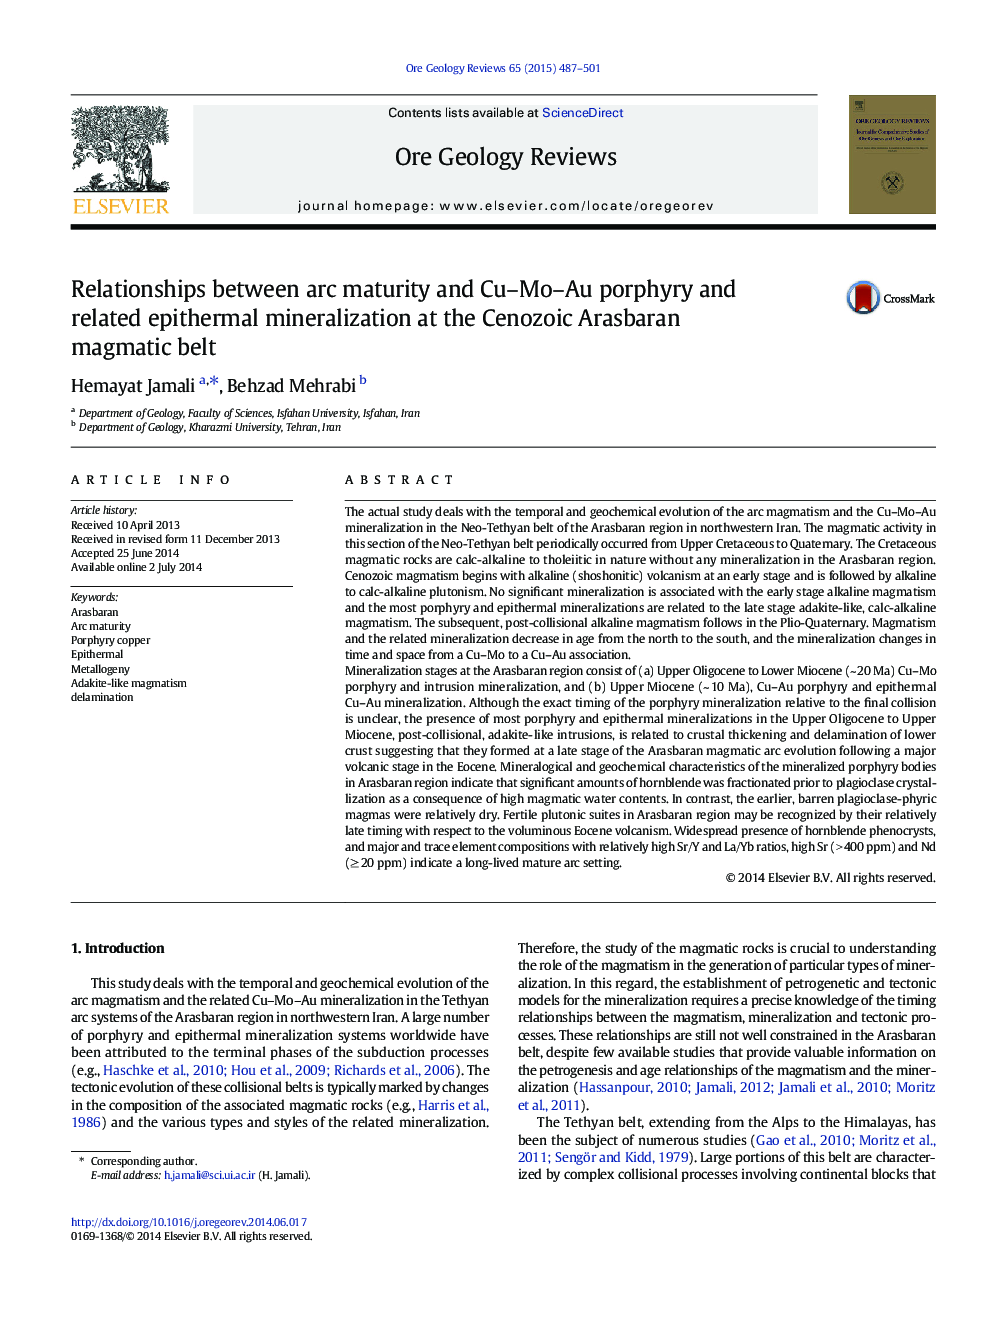 Relationships between arc maturity and Cu–Mo–Au porphyry and related epithermal mineralization at the Cenozoic Arasbaran magmatic belt